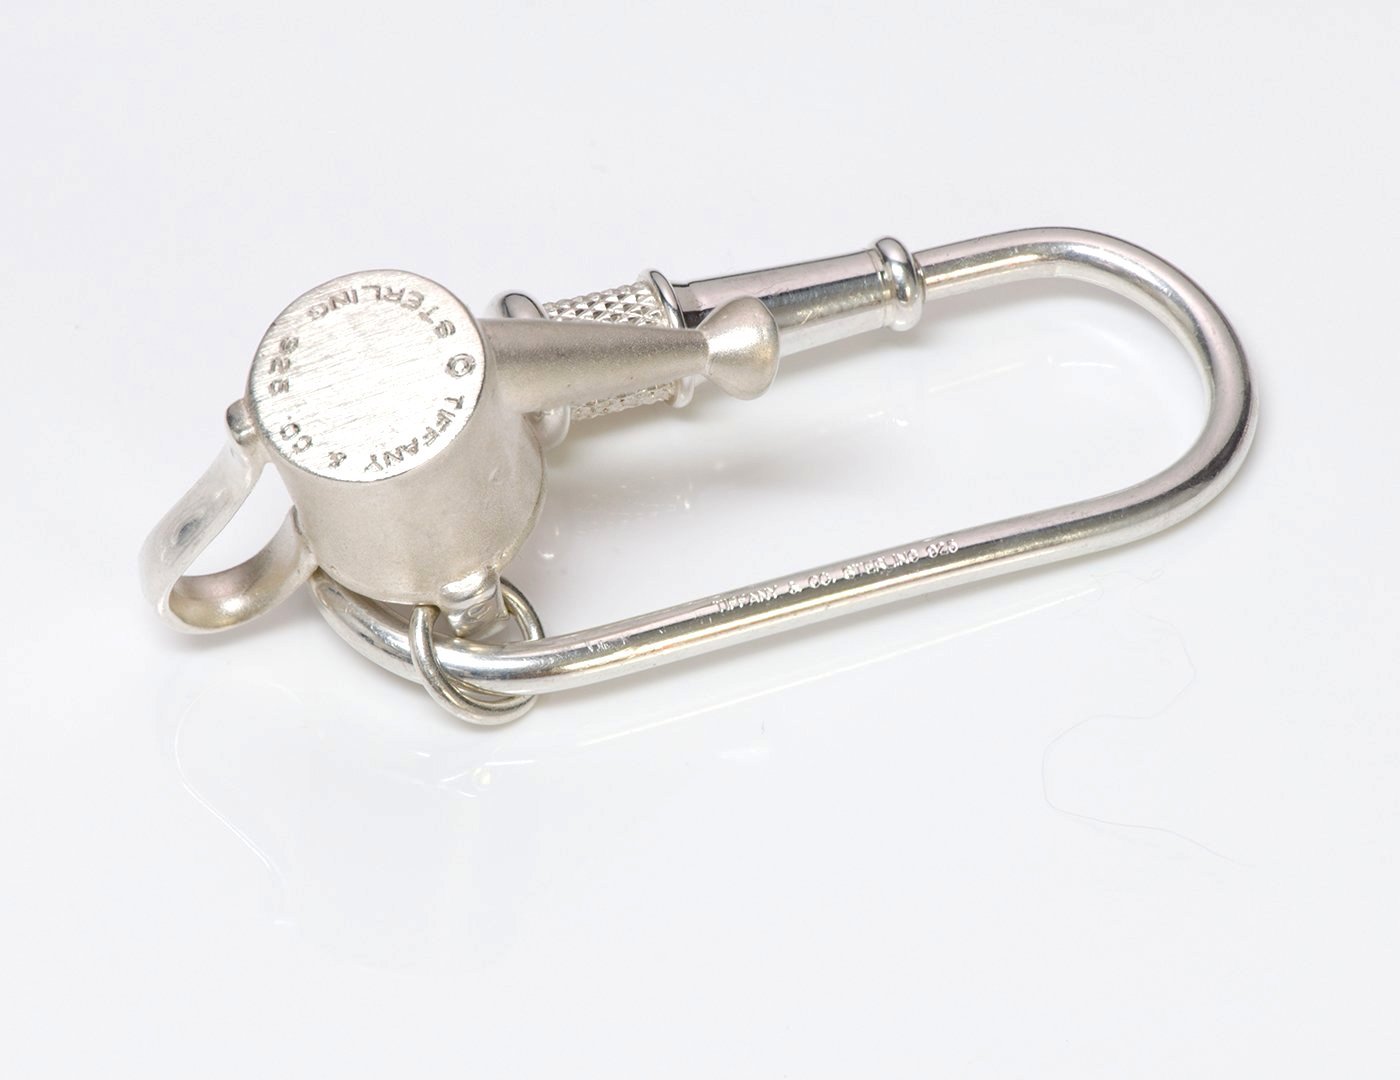 Tiffany & Co. Sterling Silver Watering Can Garden Fire Hose Key Ring Chain